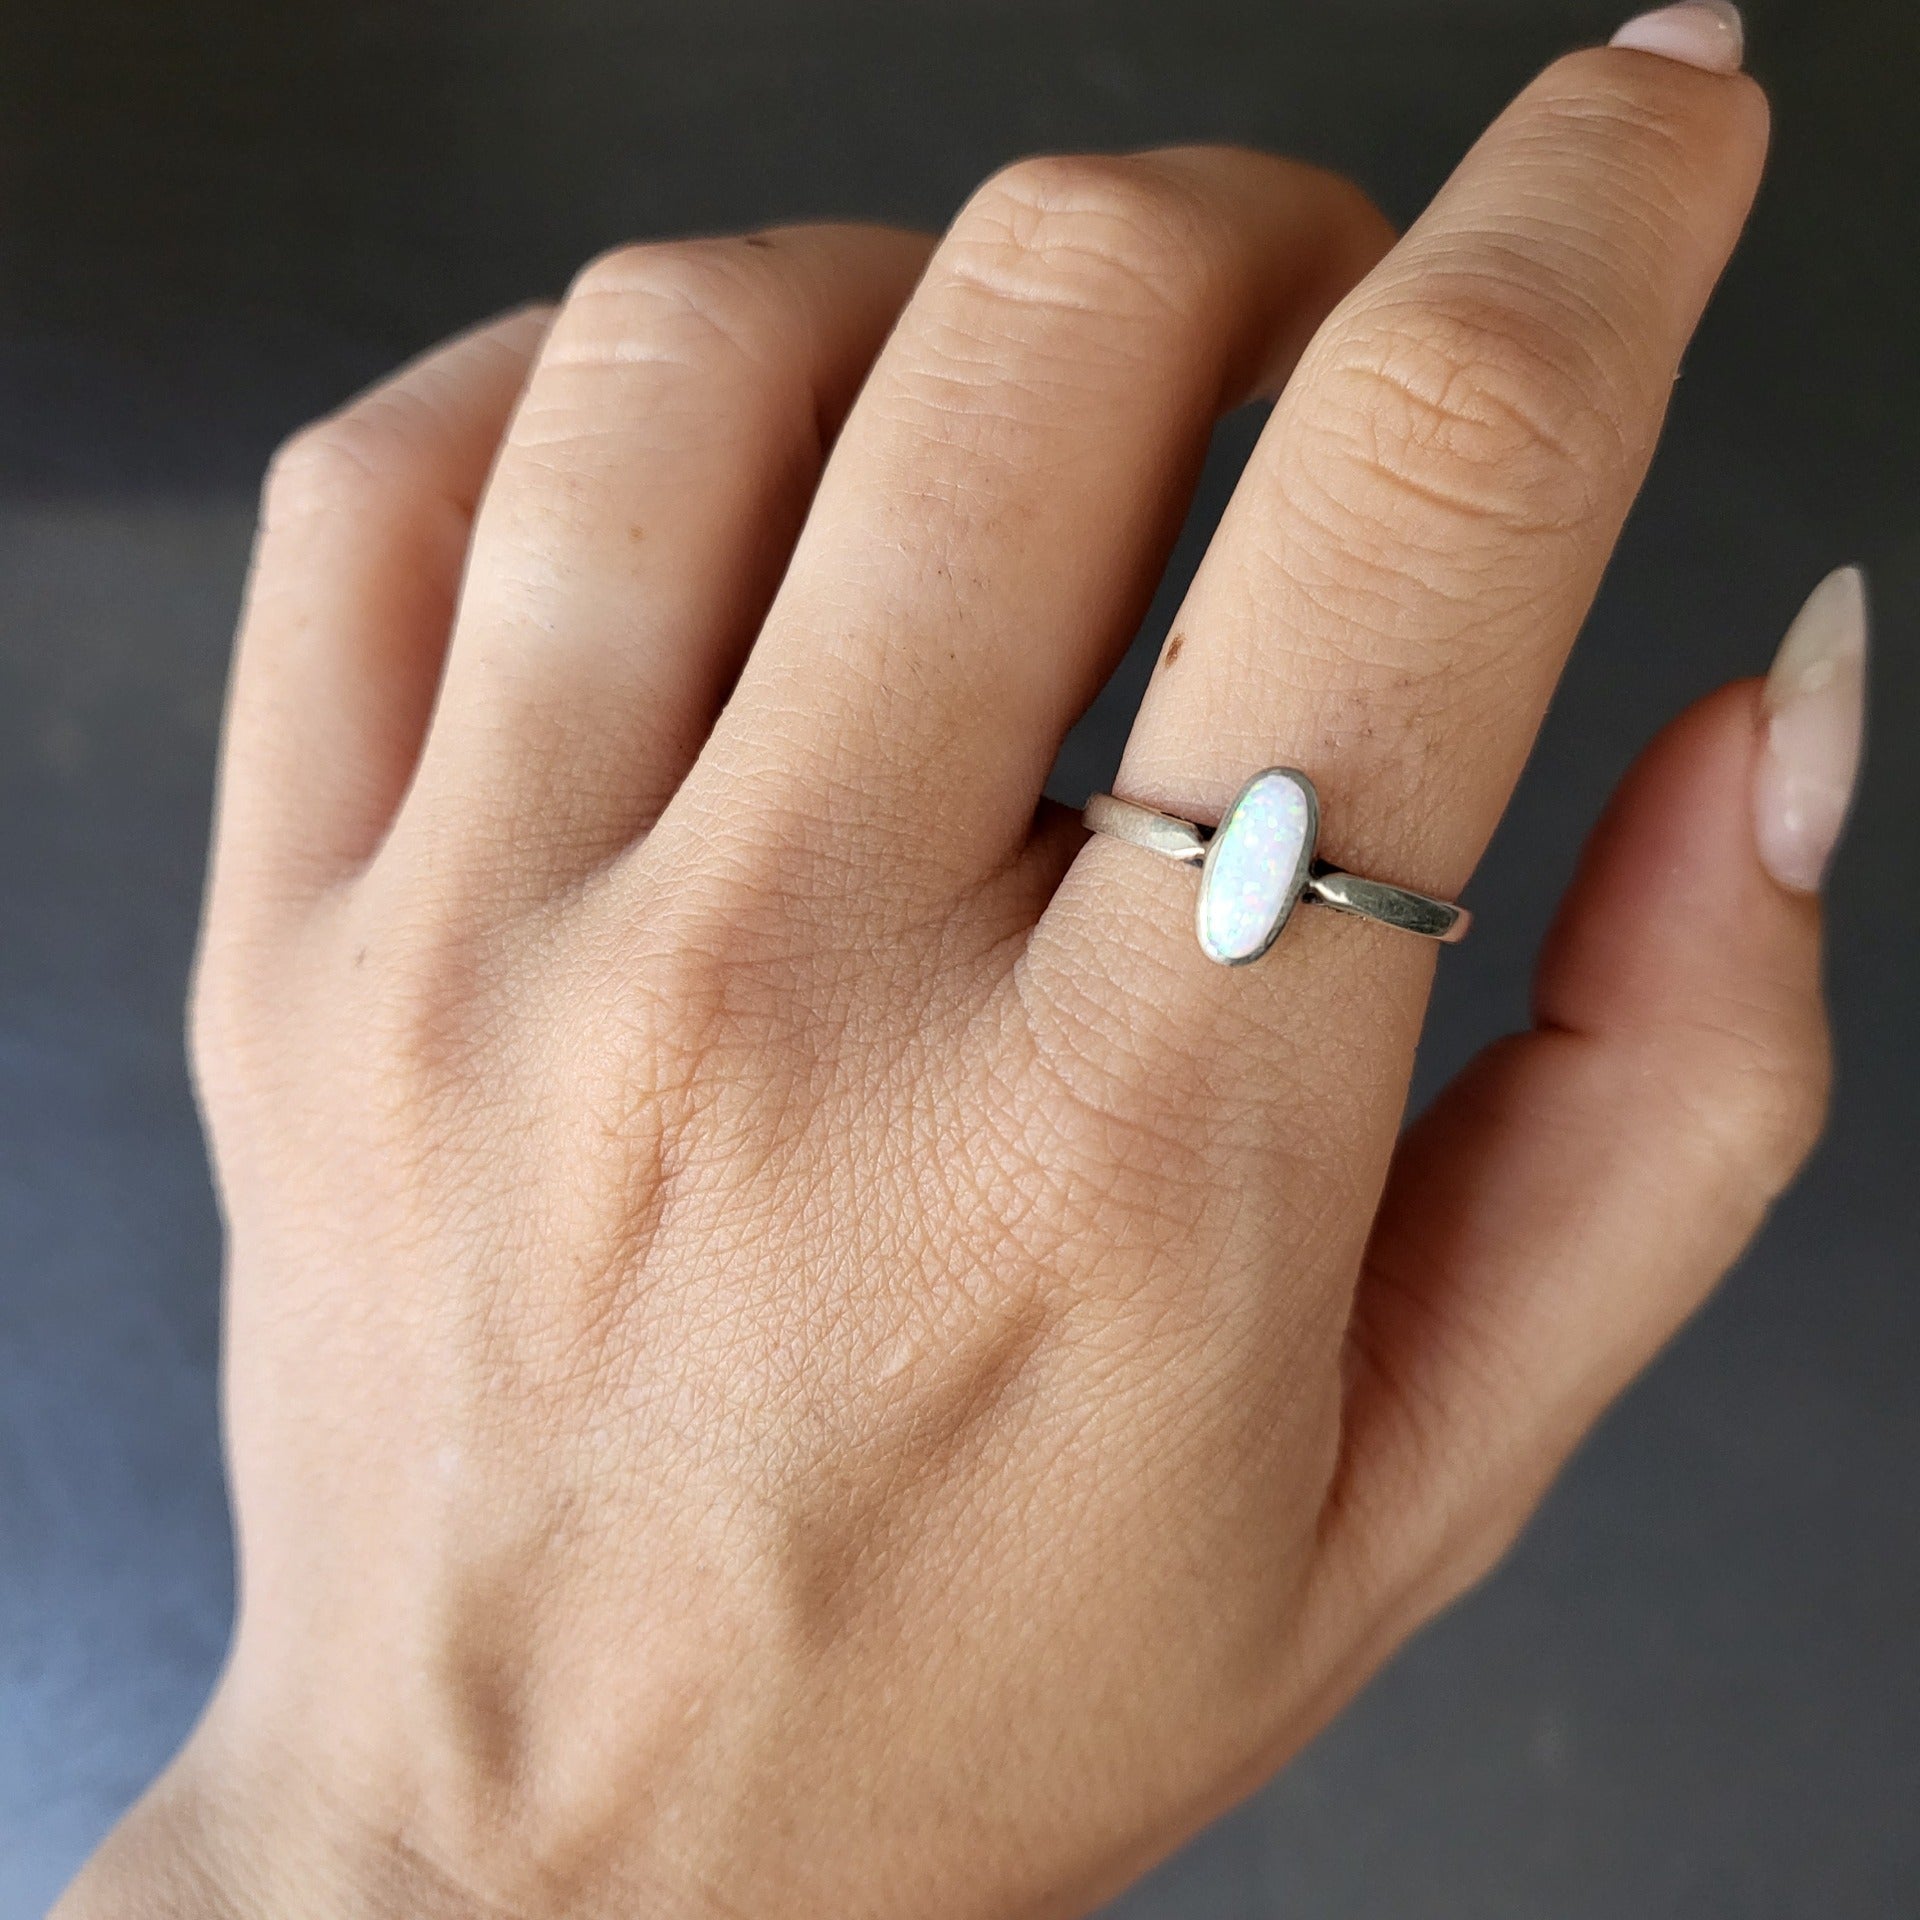 White Opal Ring, Silver Sterling Ring With White Opal Stone, Made to Order  Any Size, Gift for Her - Etsy